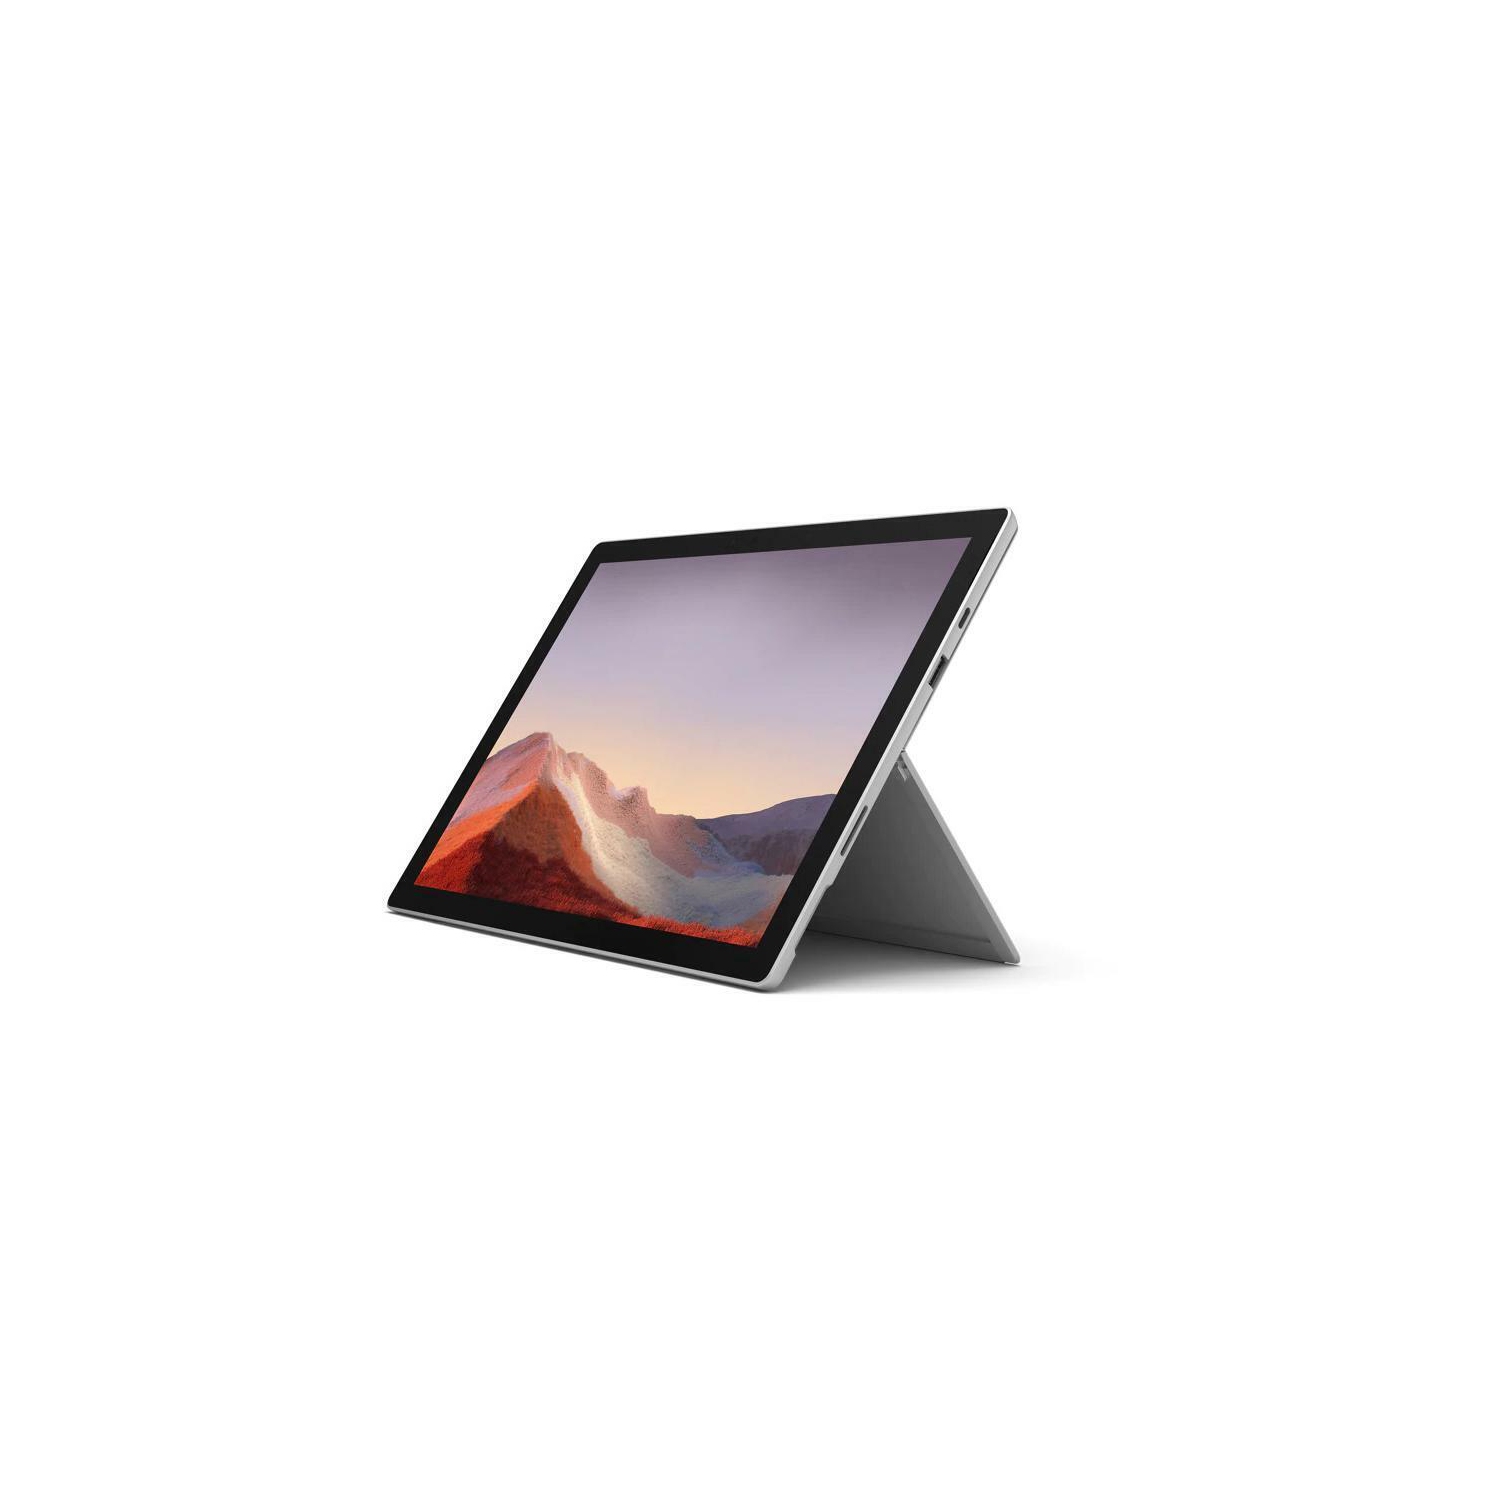 Microsoft Surface Pro 7 12.3 inch Touch i5 8GB Windows 10 Pro Platinum Refurbished (Excellent)